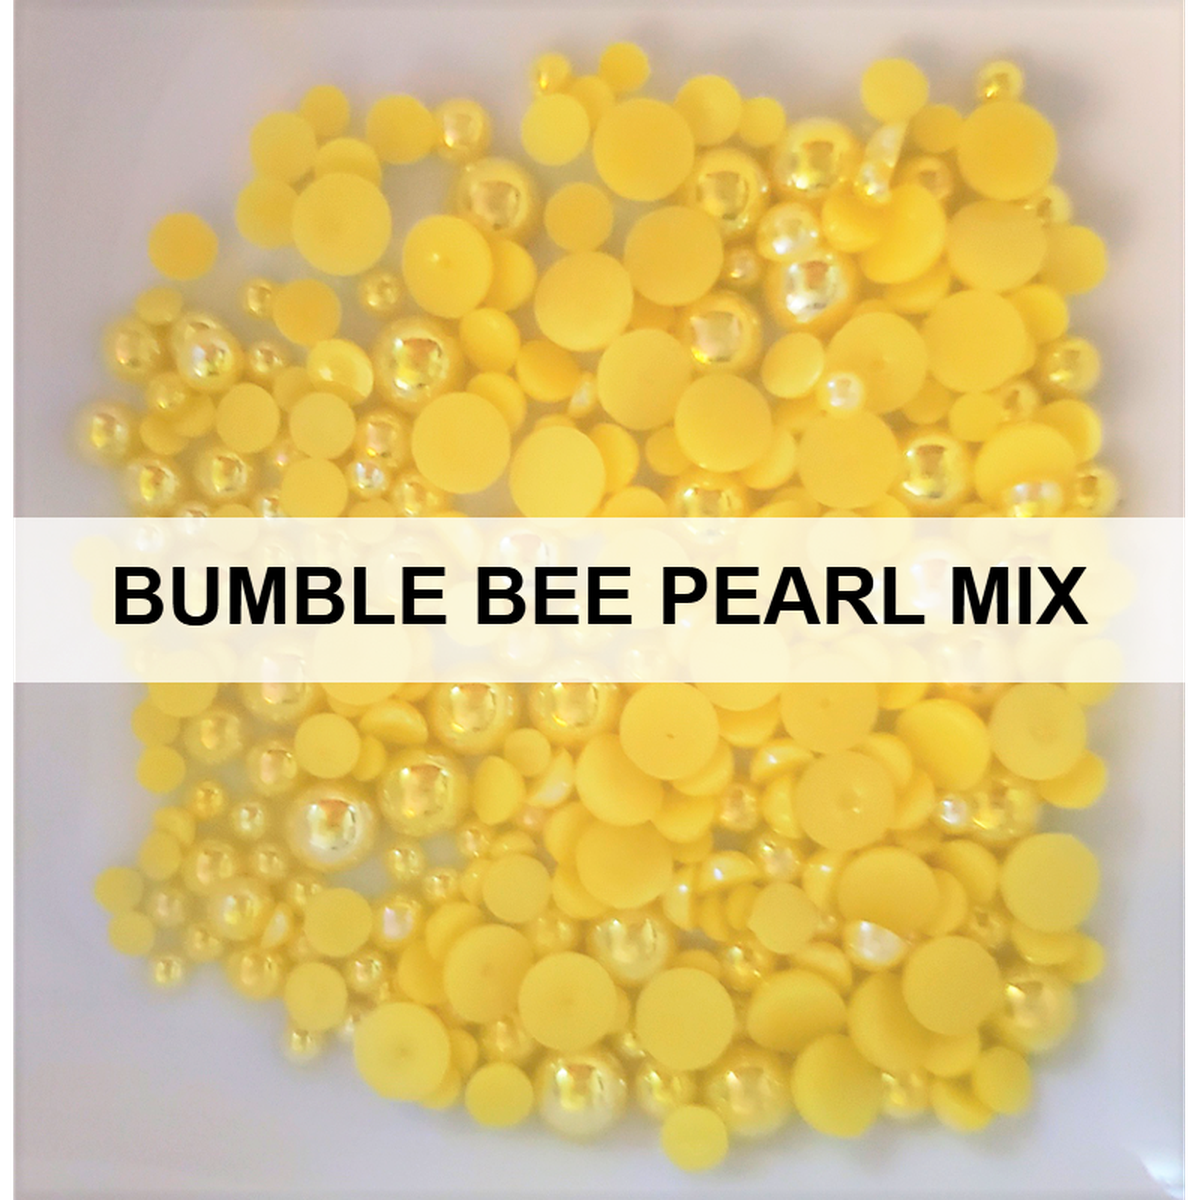 Bumble Bee Pearl Mix